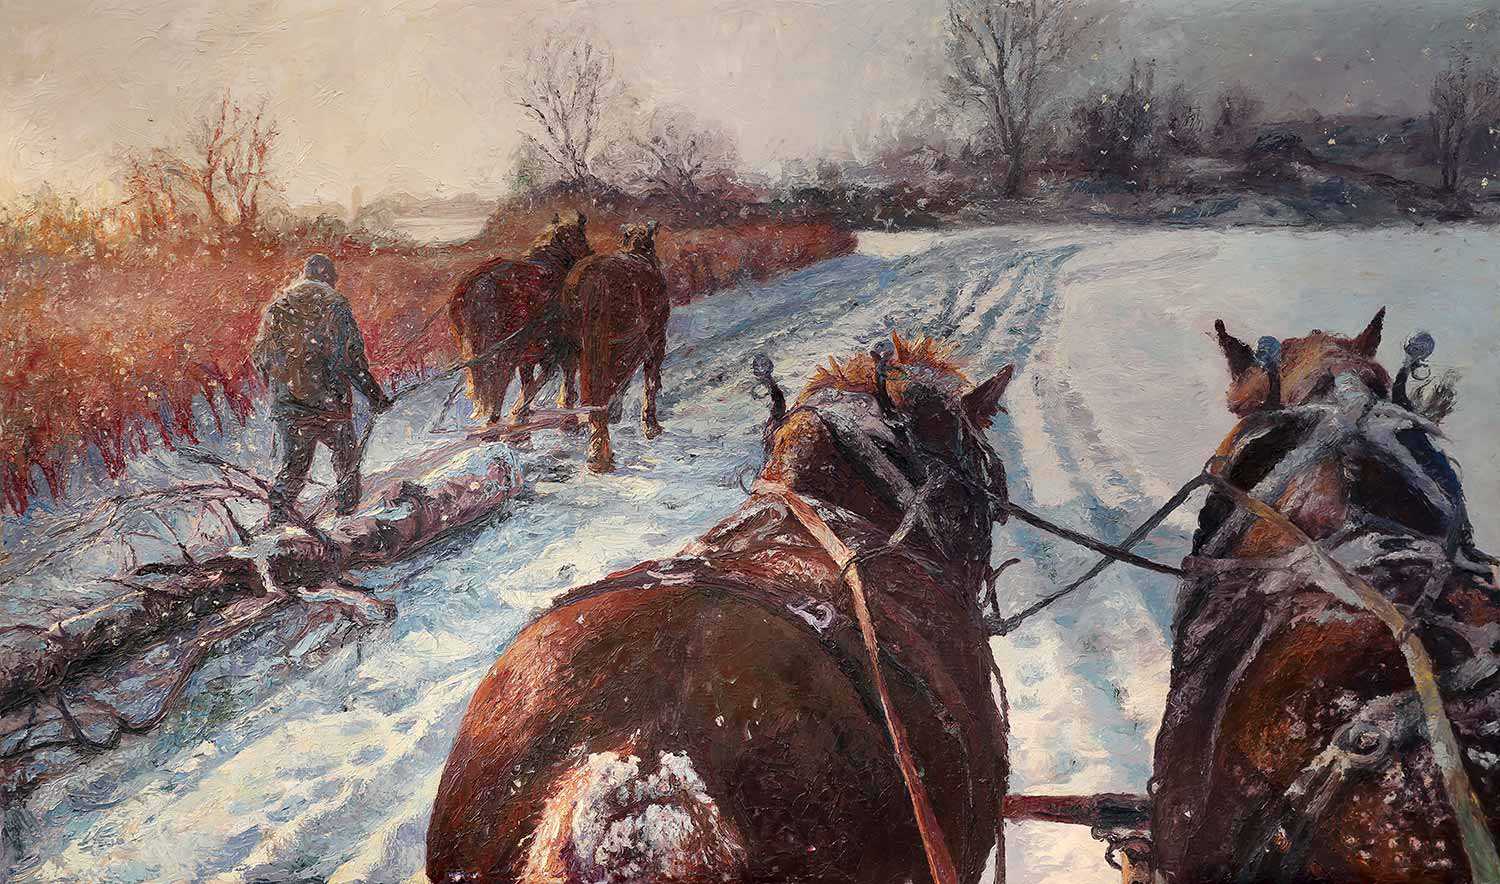 “Horse Logging” by Grayden Laing, oil on canvas